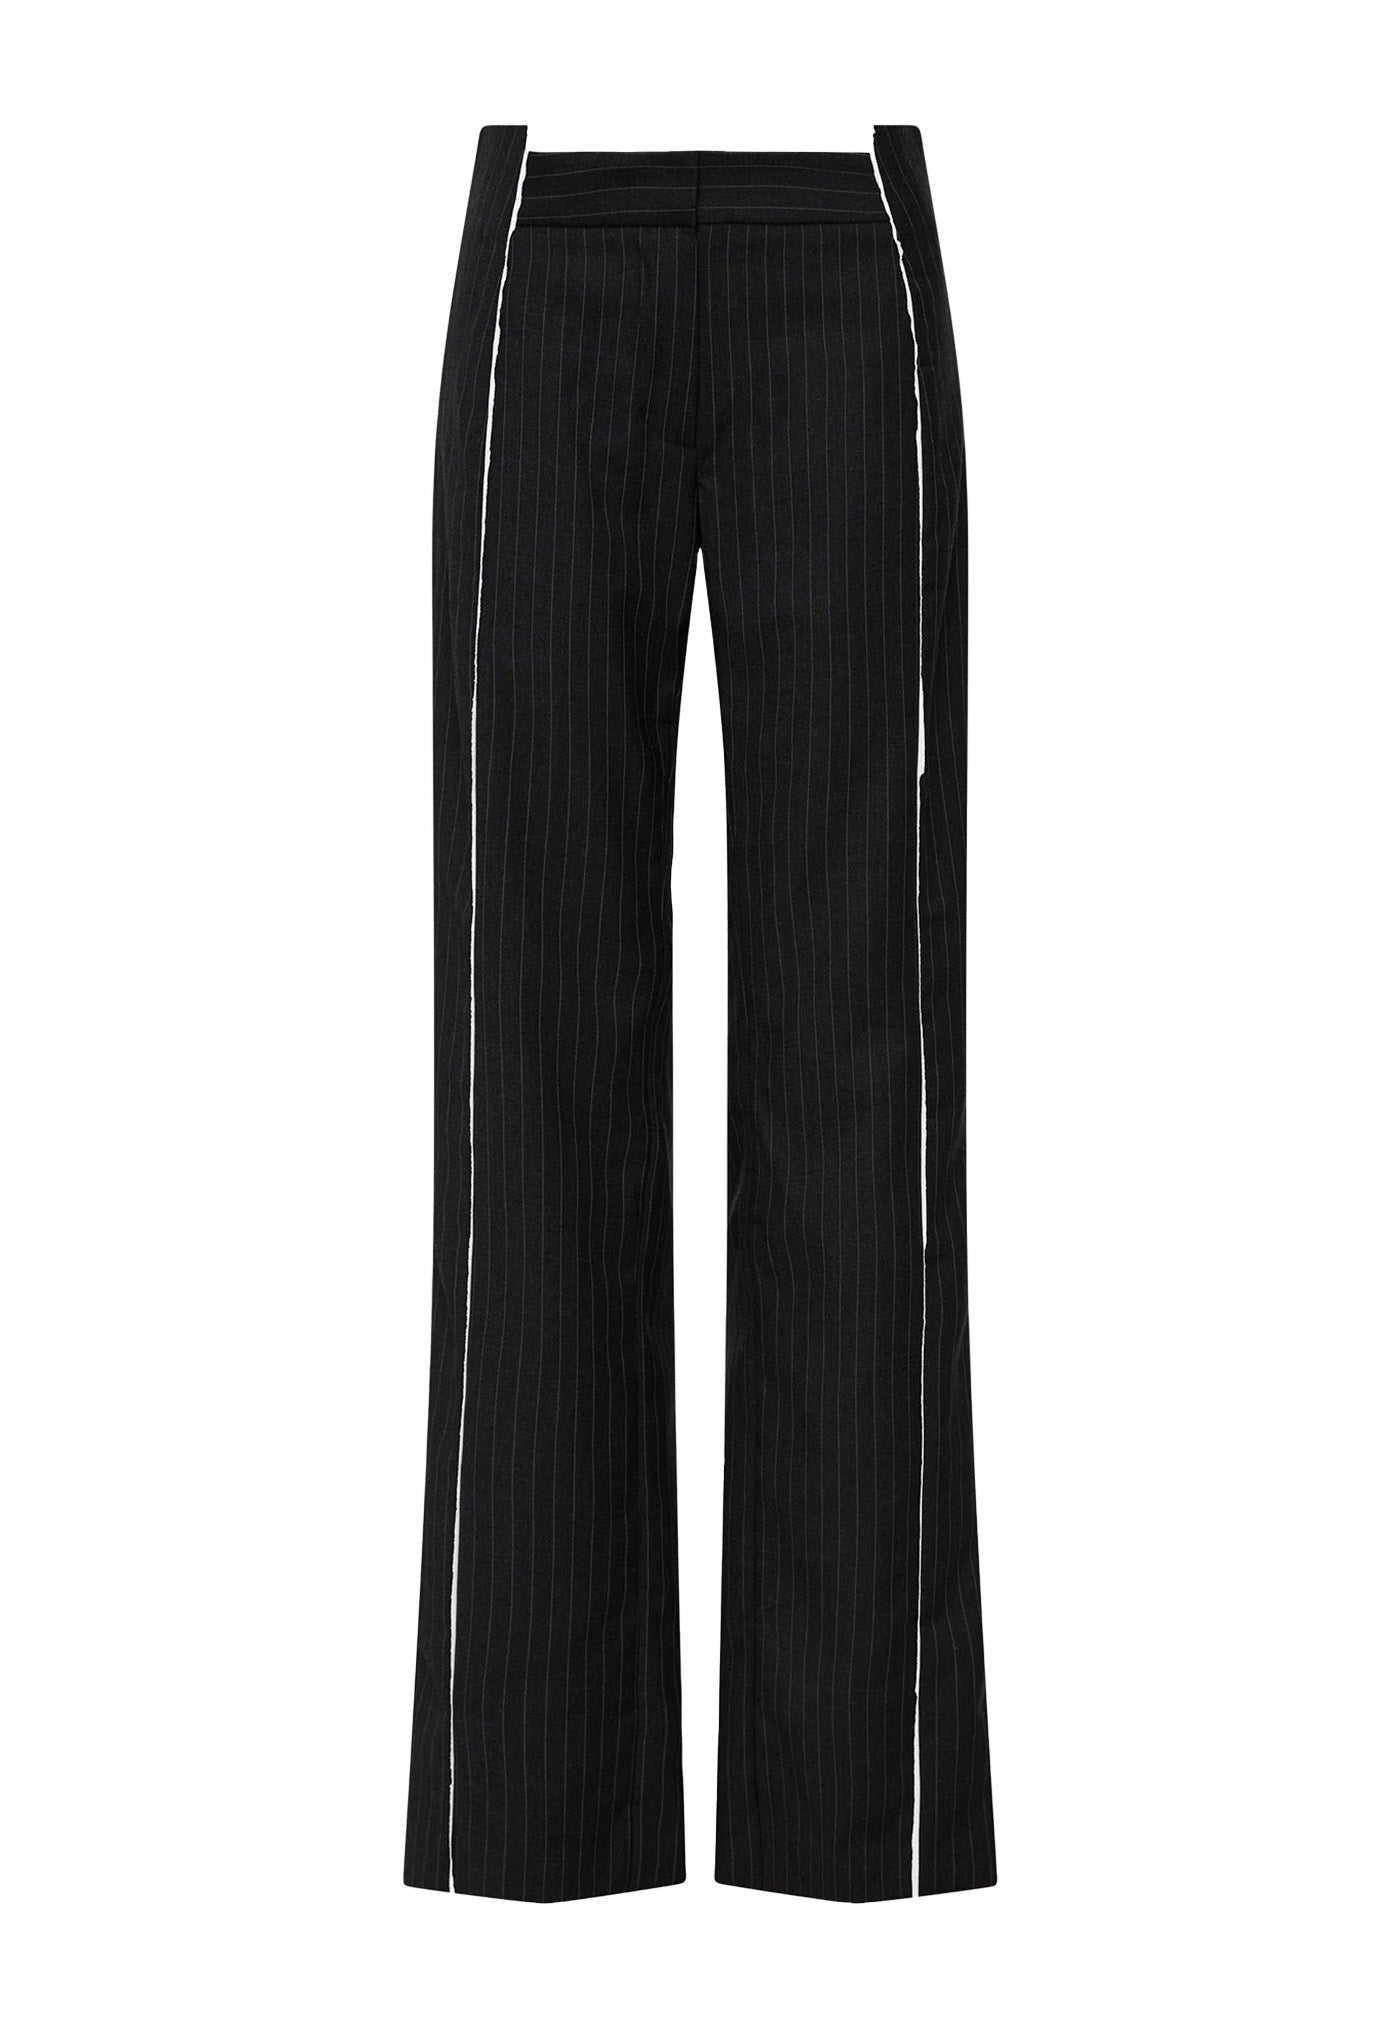 Deconstructed Pinstripe Trousers - Black sold by Angel Divine